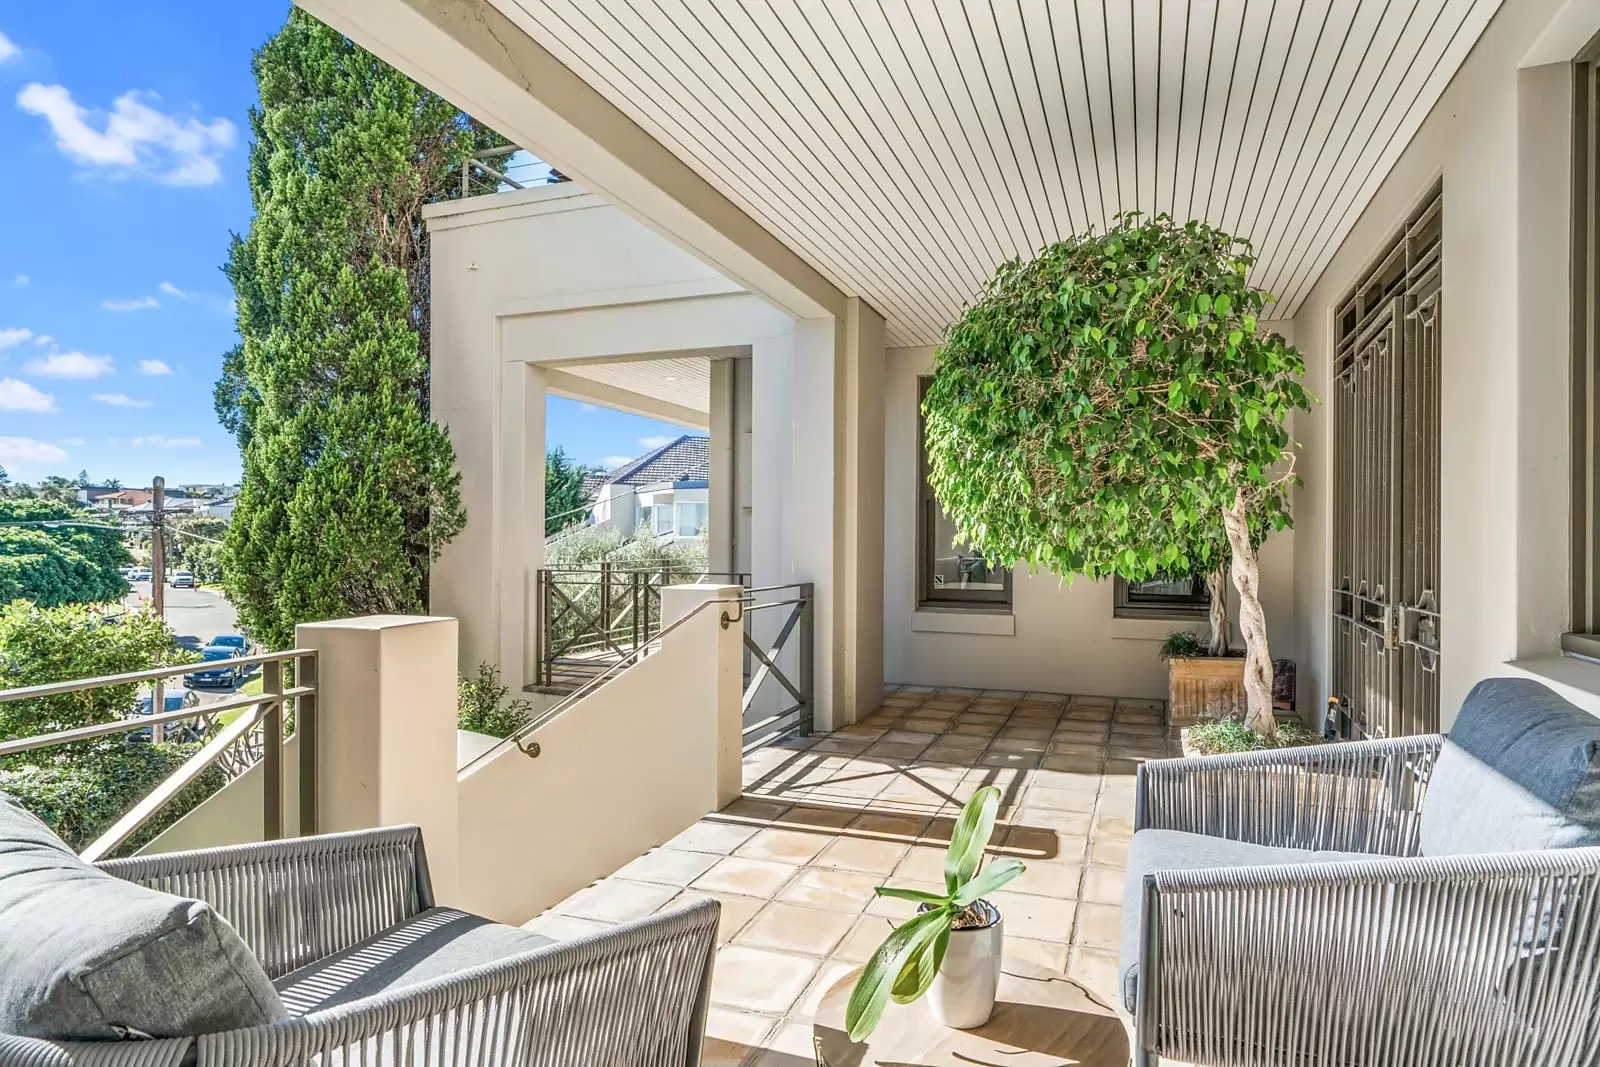 Photo #11: 33 Olphert Avenue, Vaucluse - Sold by Sydney Sotheby's International Realty